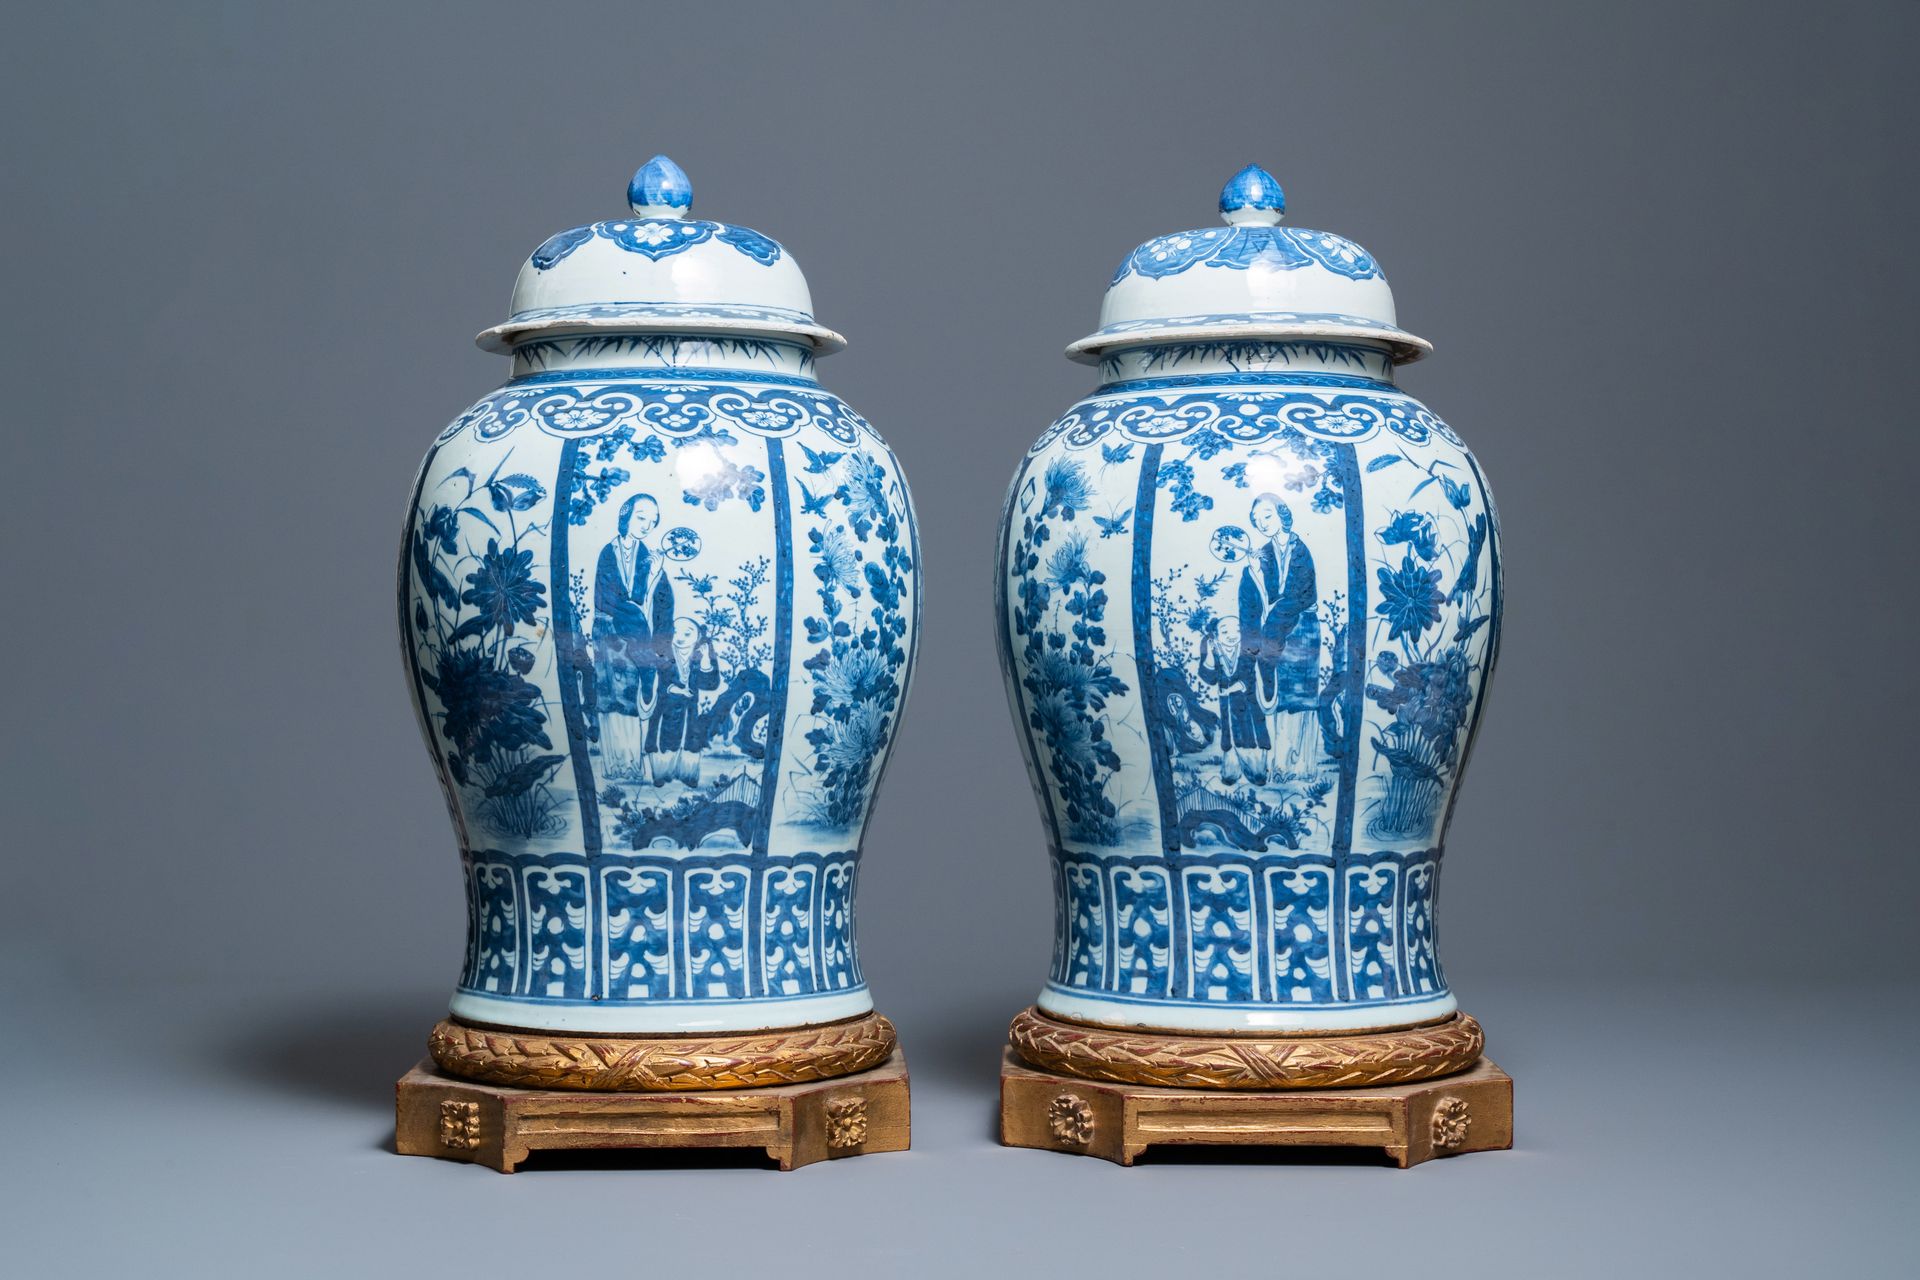 A pair of large Chinese blue and white covered vases, 19th C. 全名：一对中国蓝白相间的大花瓶，19&hellip;